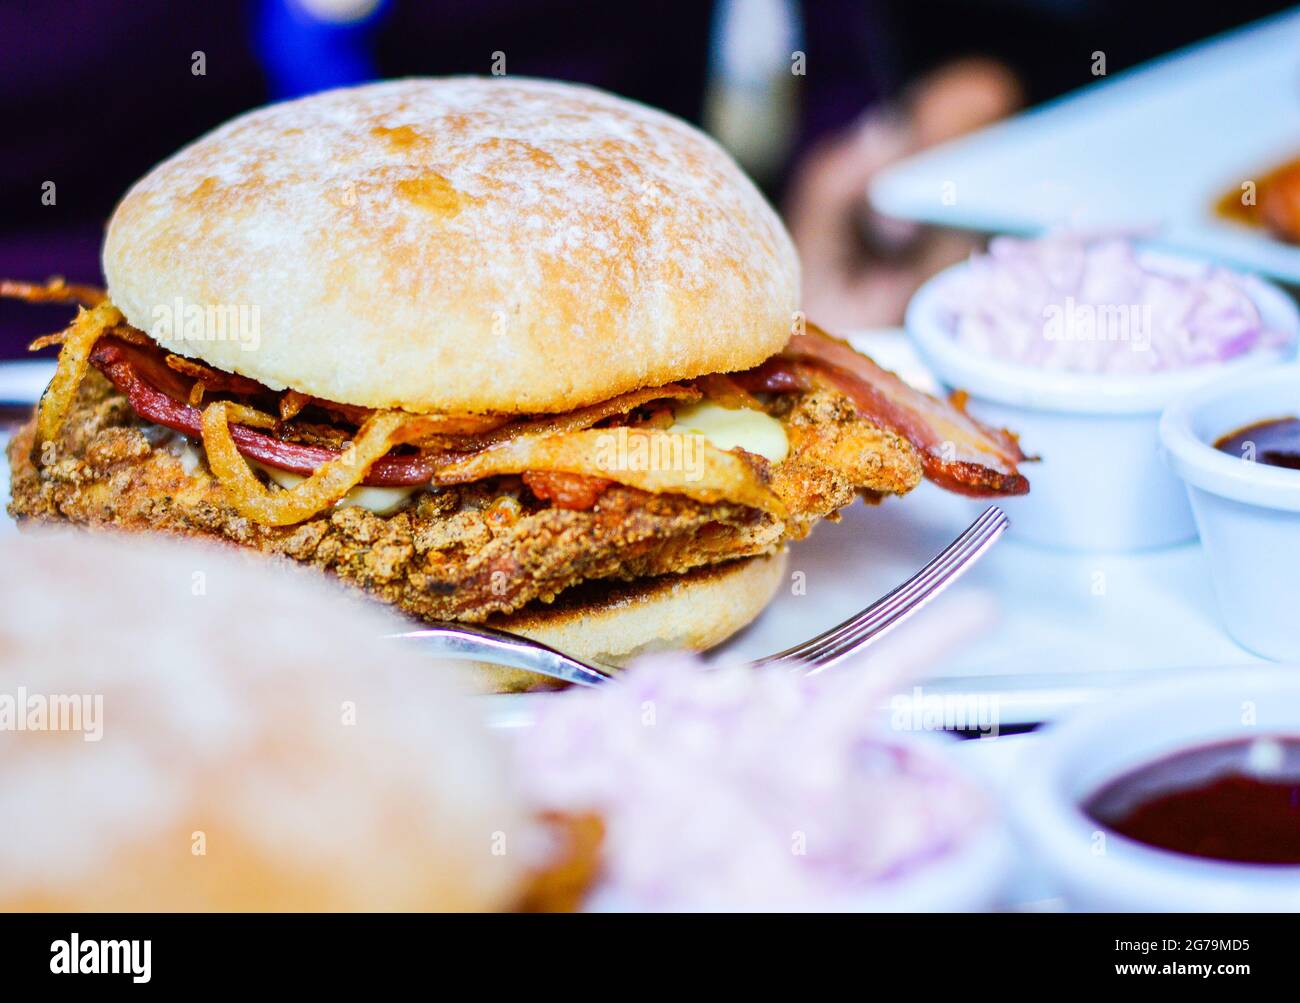 Burger with Meat, Bacon, Fried Onions & Coleslaw on Restaurant Table Stock Photo